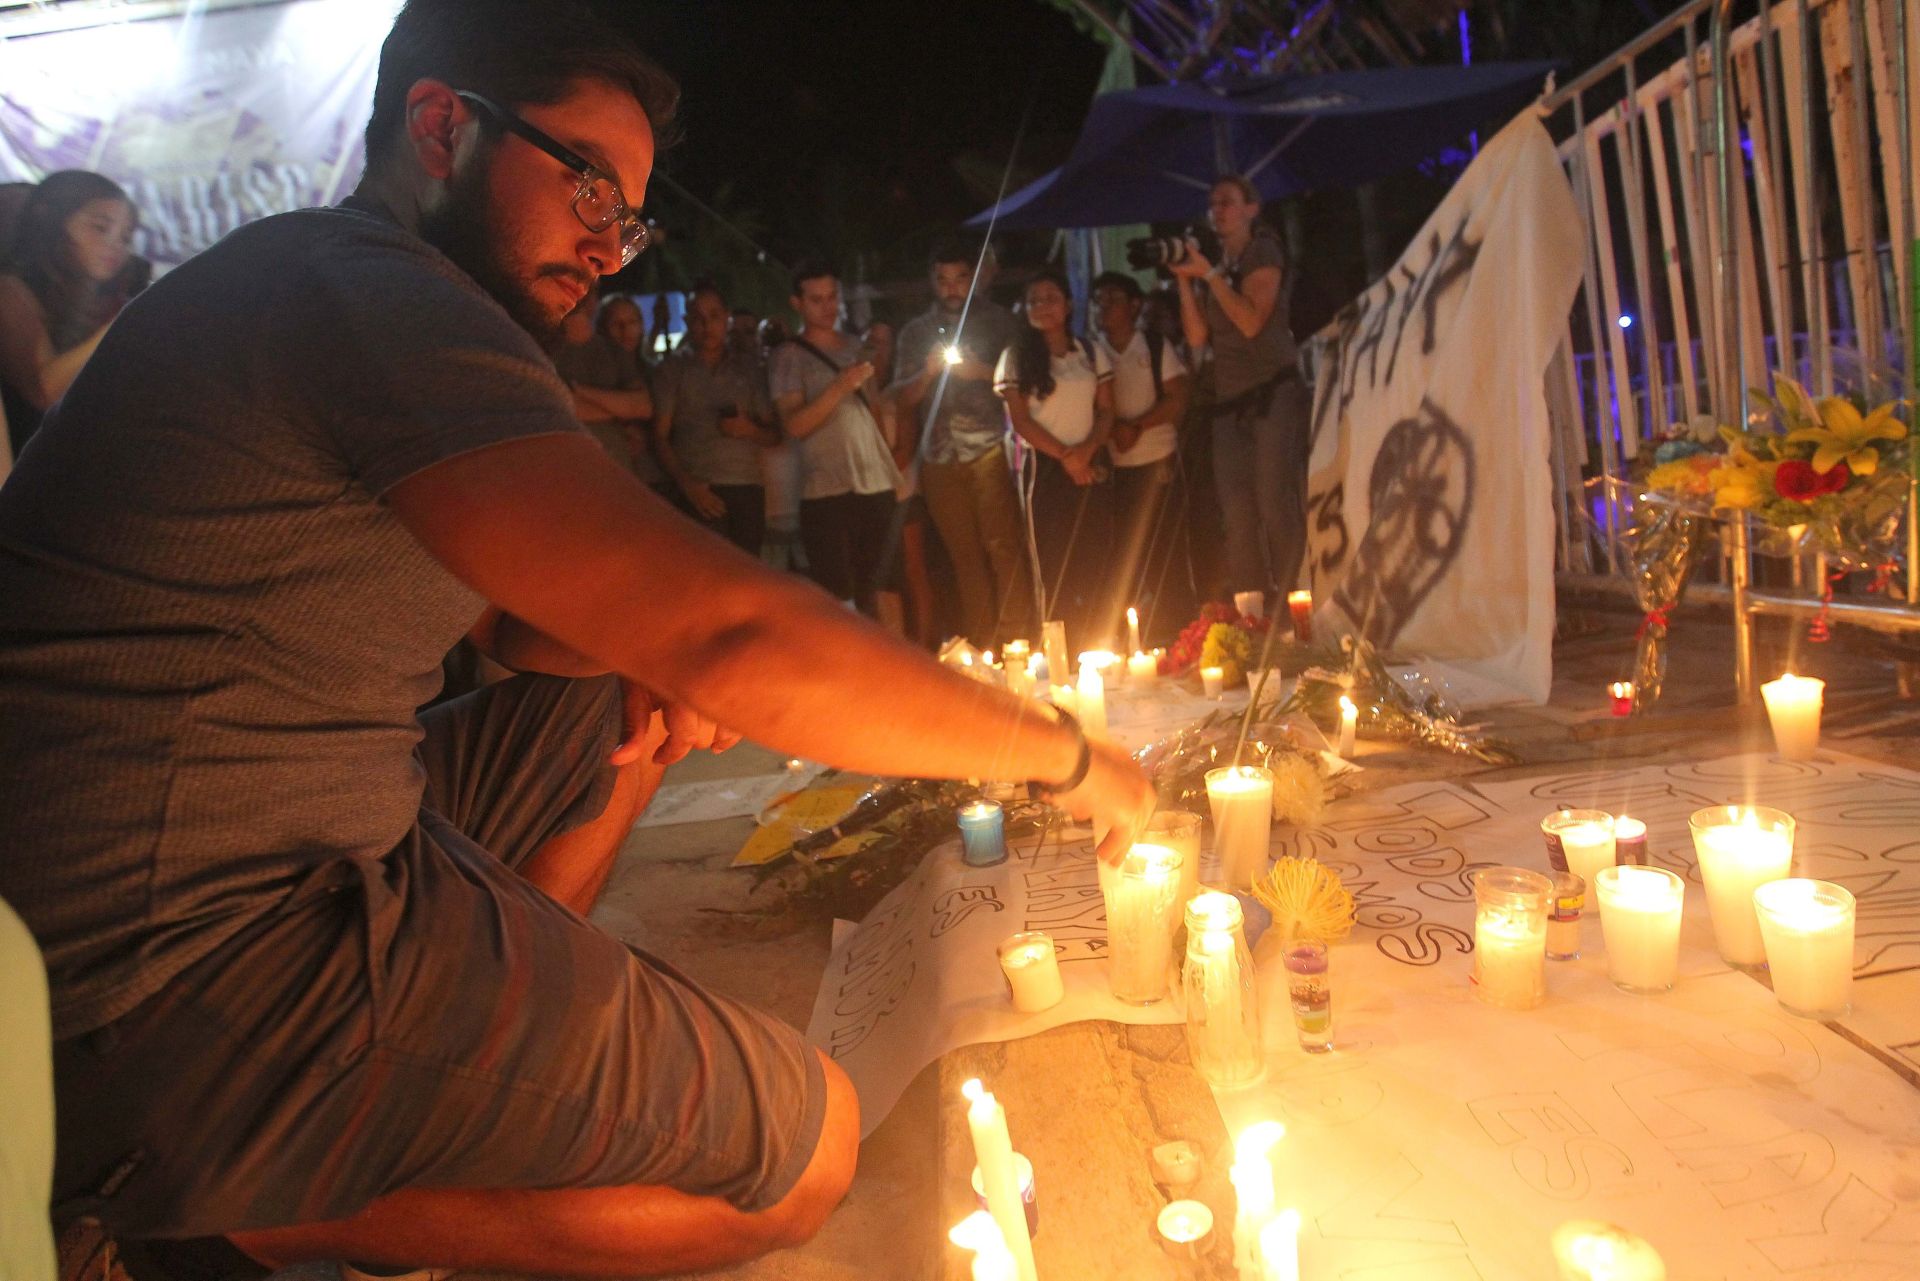 epa05722771 People place candles at a memorial for the victims of a shooting that occurred during the BPM Music Festival at the Blue Parrot Nightclub, in Playa del Carmen, Mexico, 16 January 2017. According to media reports, a lone gunman entered the Blue Parrot nightclub, which was hosting a closing party for the BMP festival, and fired several shots, killing five people and leaving 15 others injured.  EPA/ALONSO CUPUL